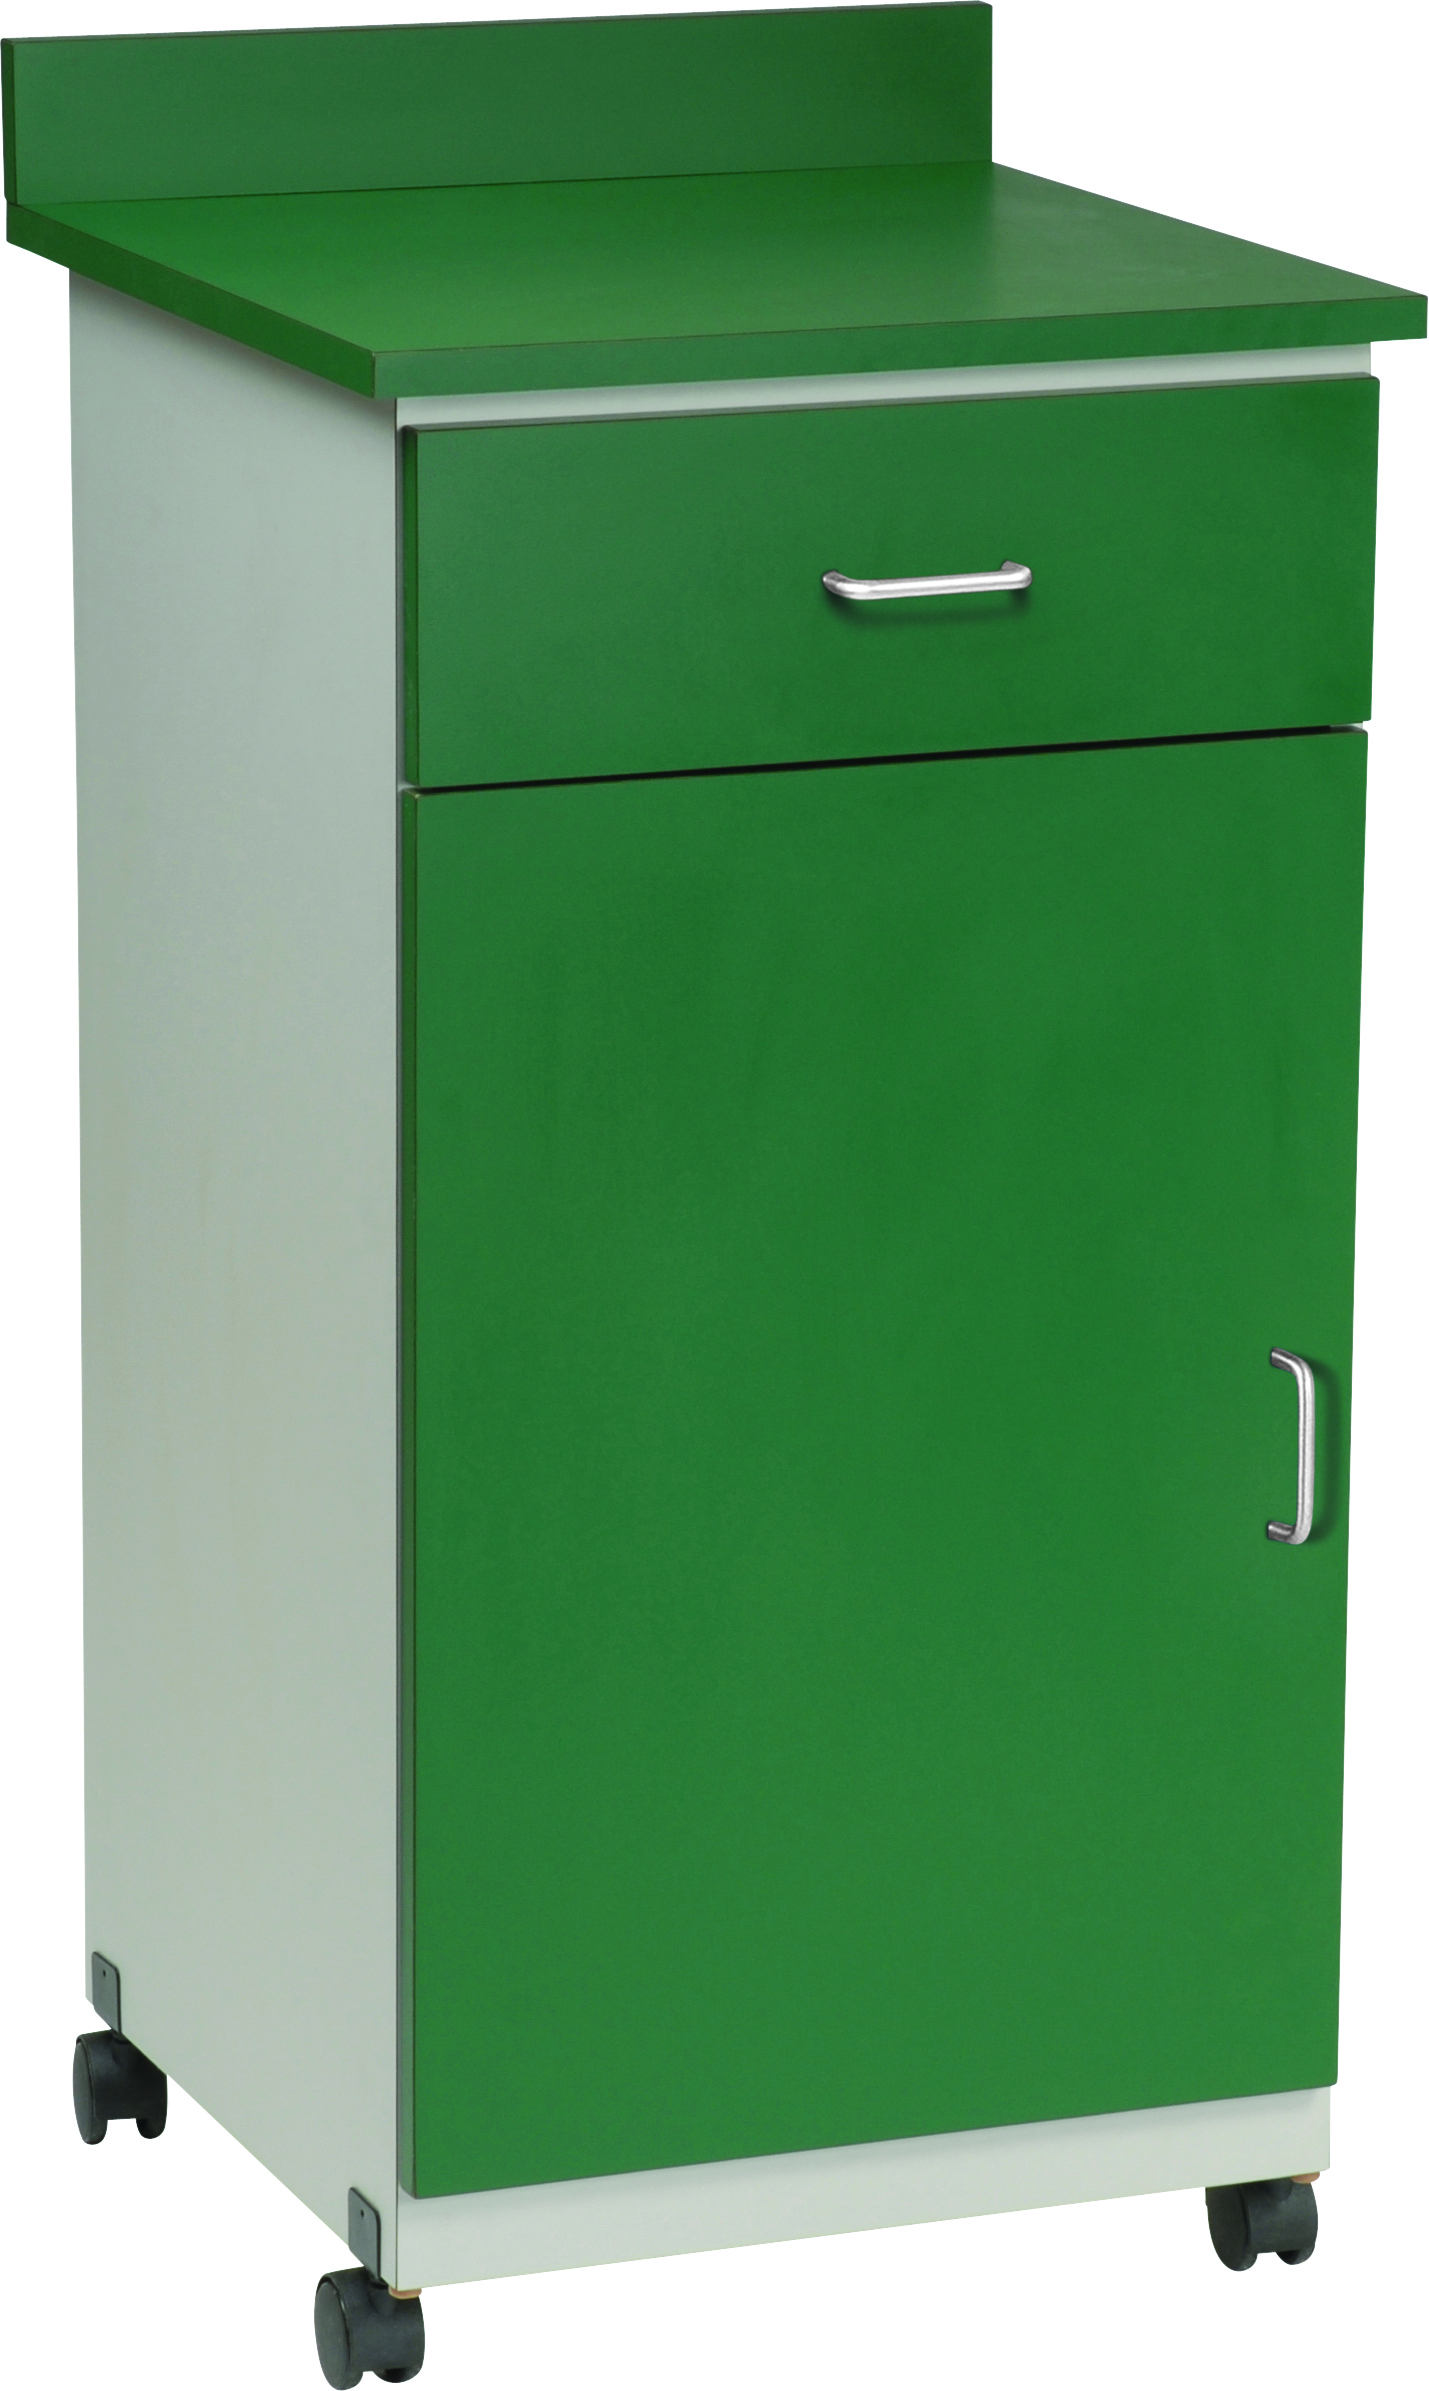 EX1D Series Express Cabinet express supply cabinet, express cabinet.